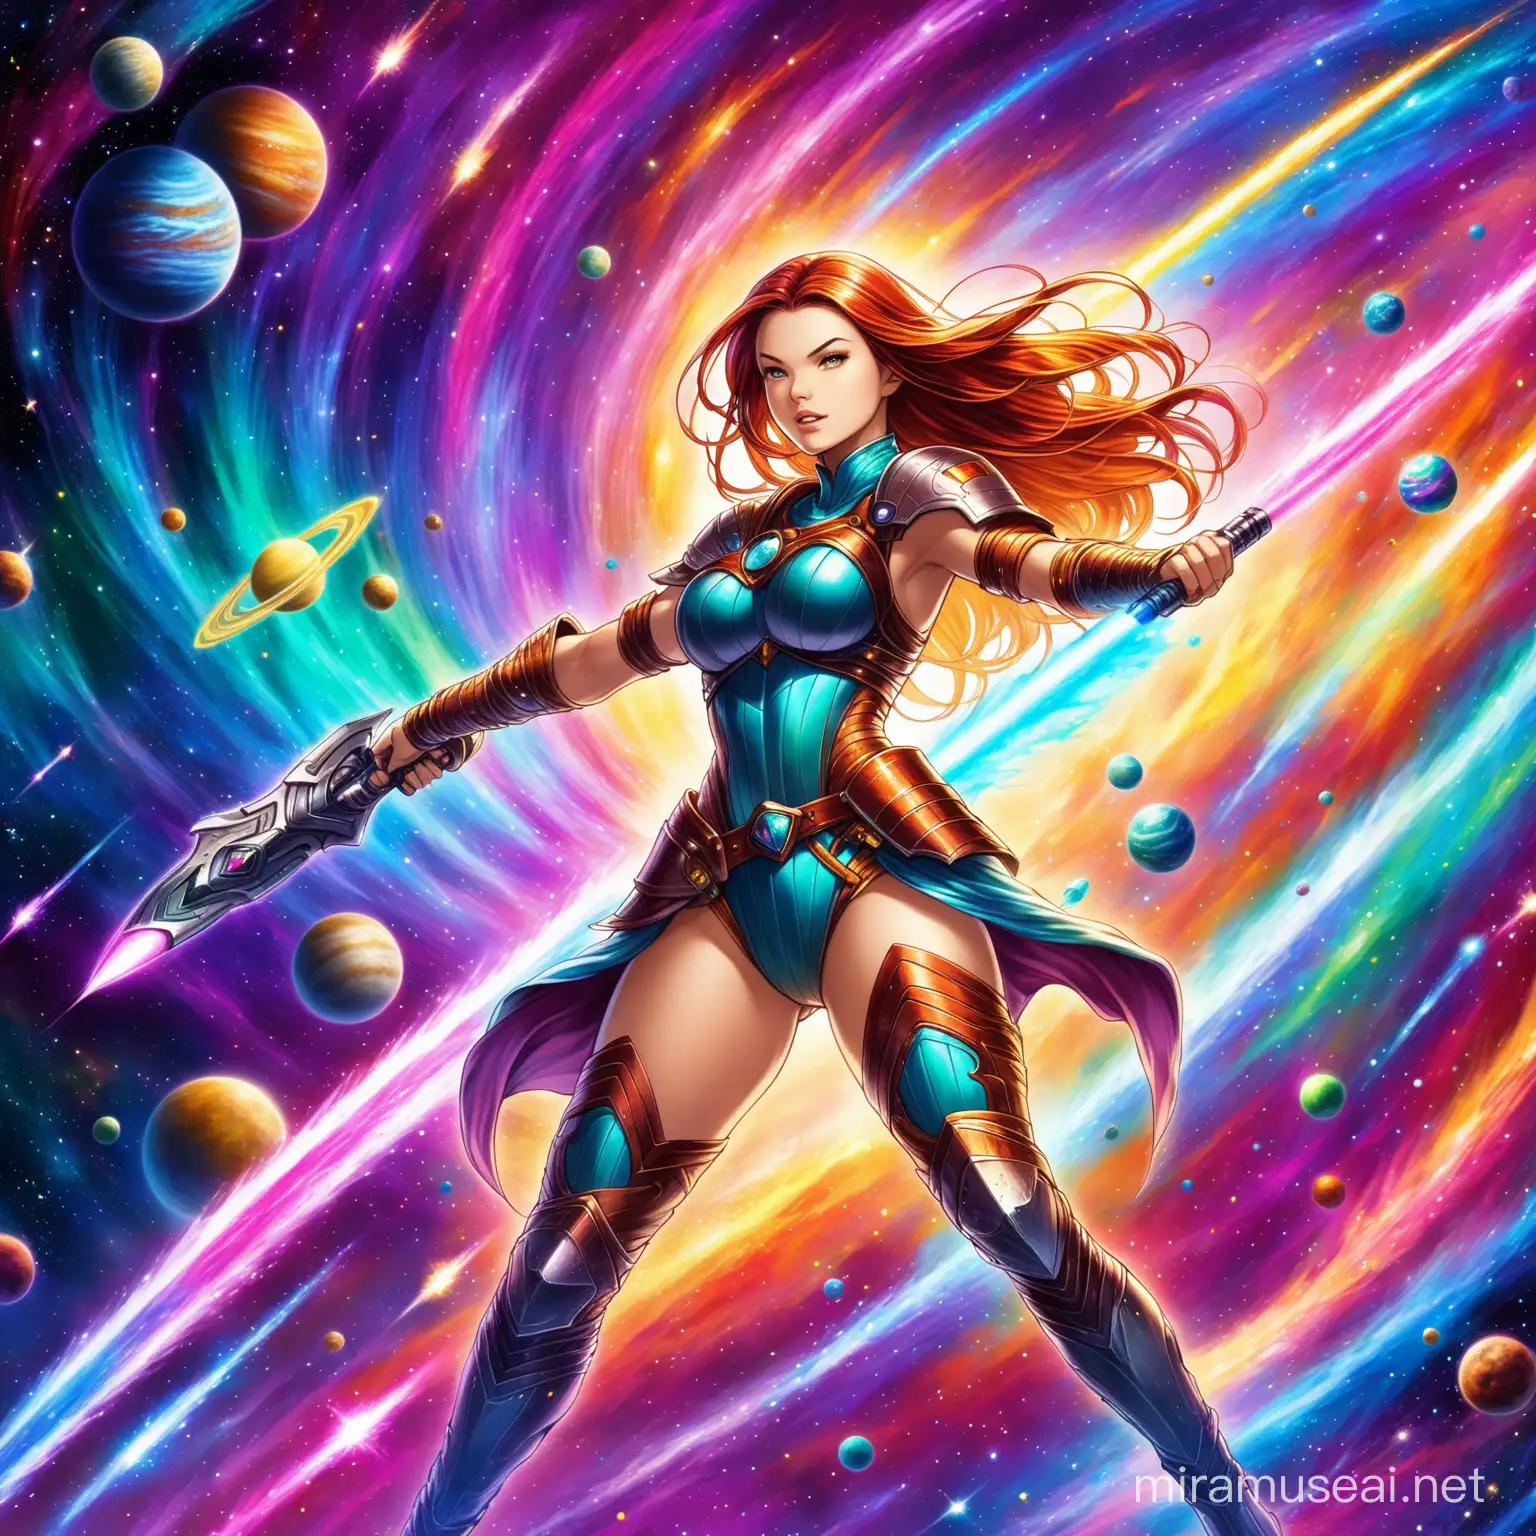 warrior princess space theme. Lots of color, action, beauty